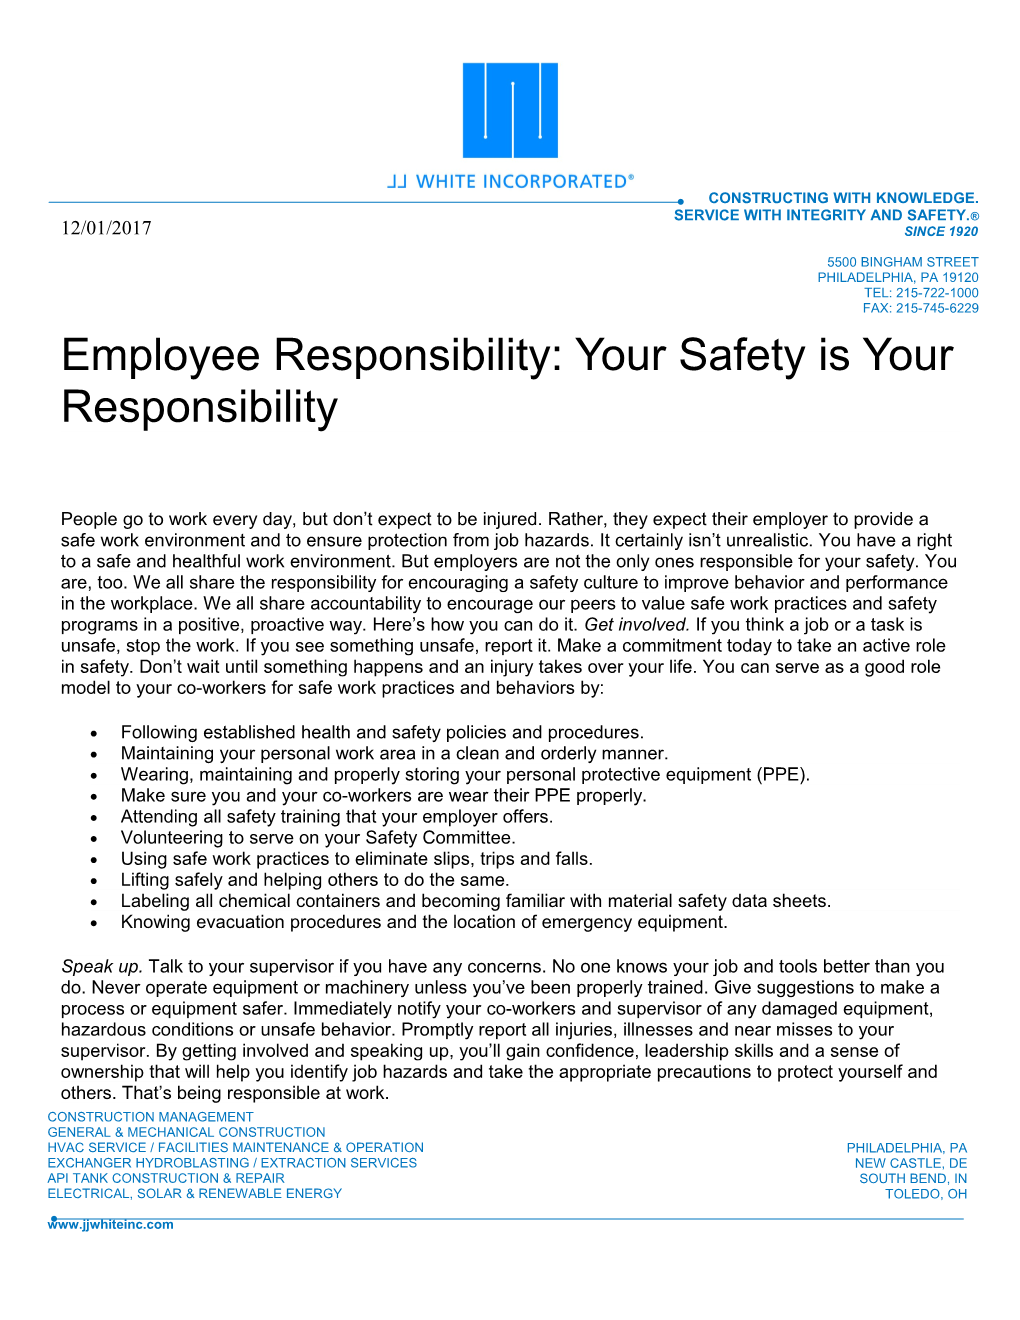 Employee Responsibility: Your Safety Is Your Responsibility